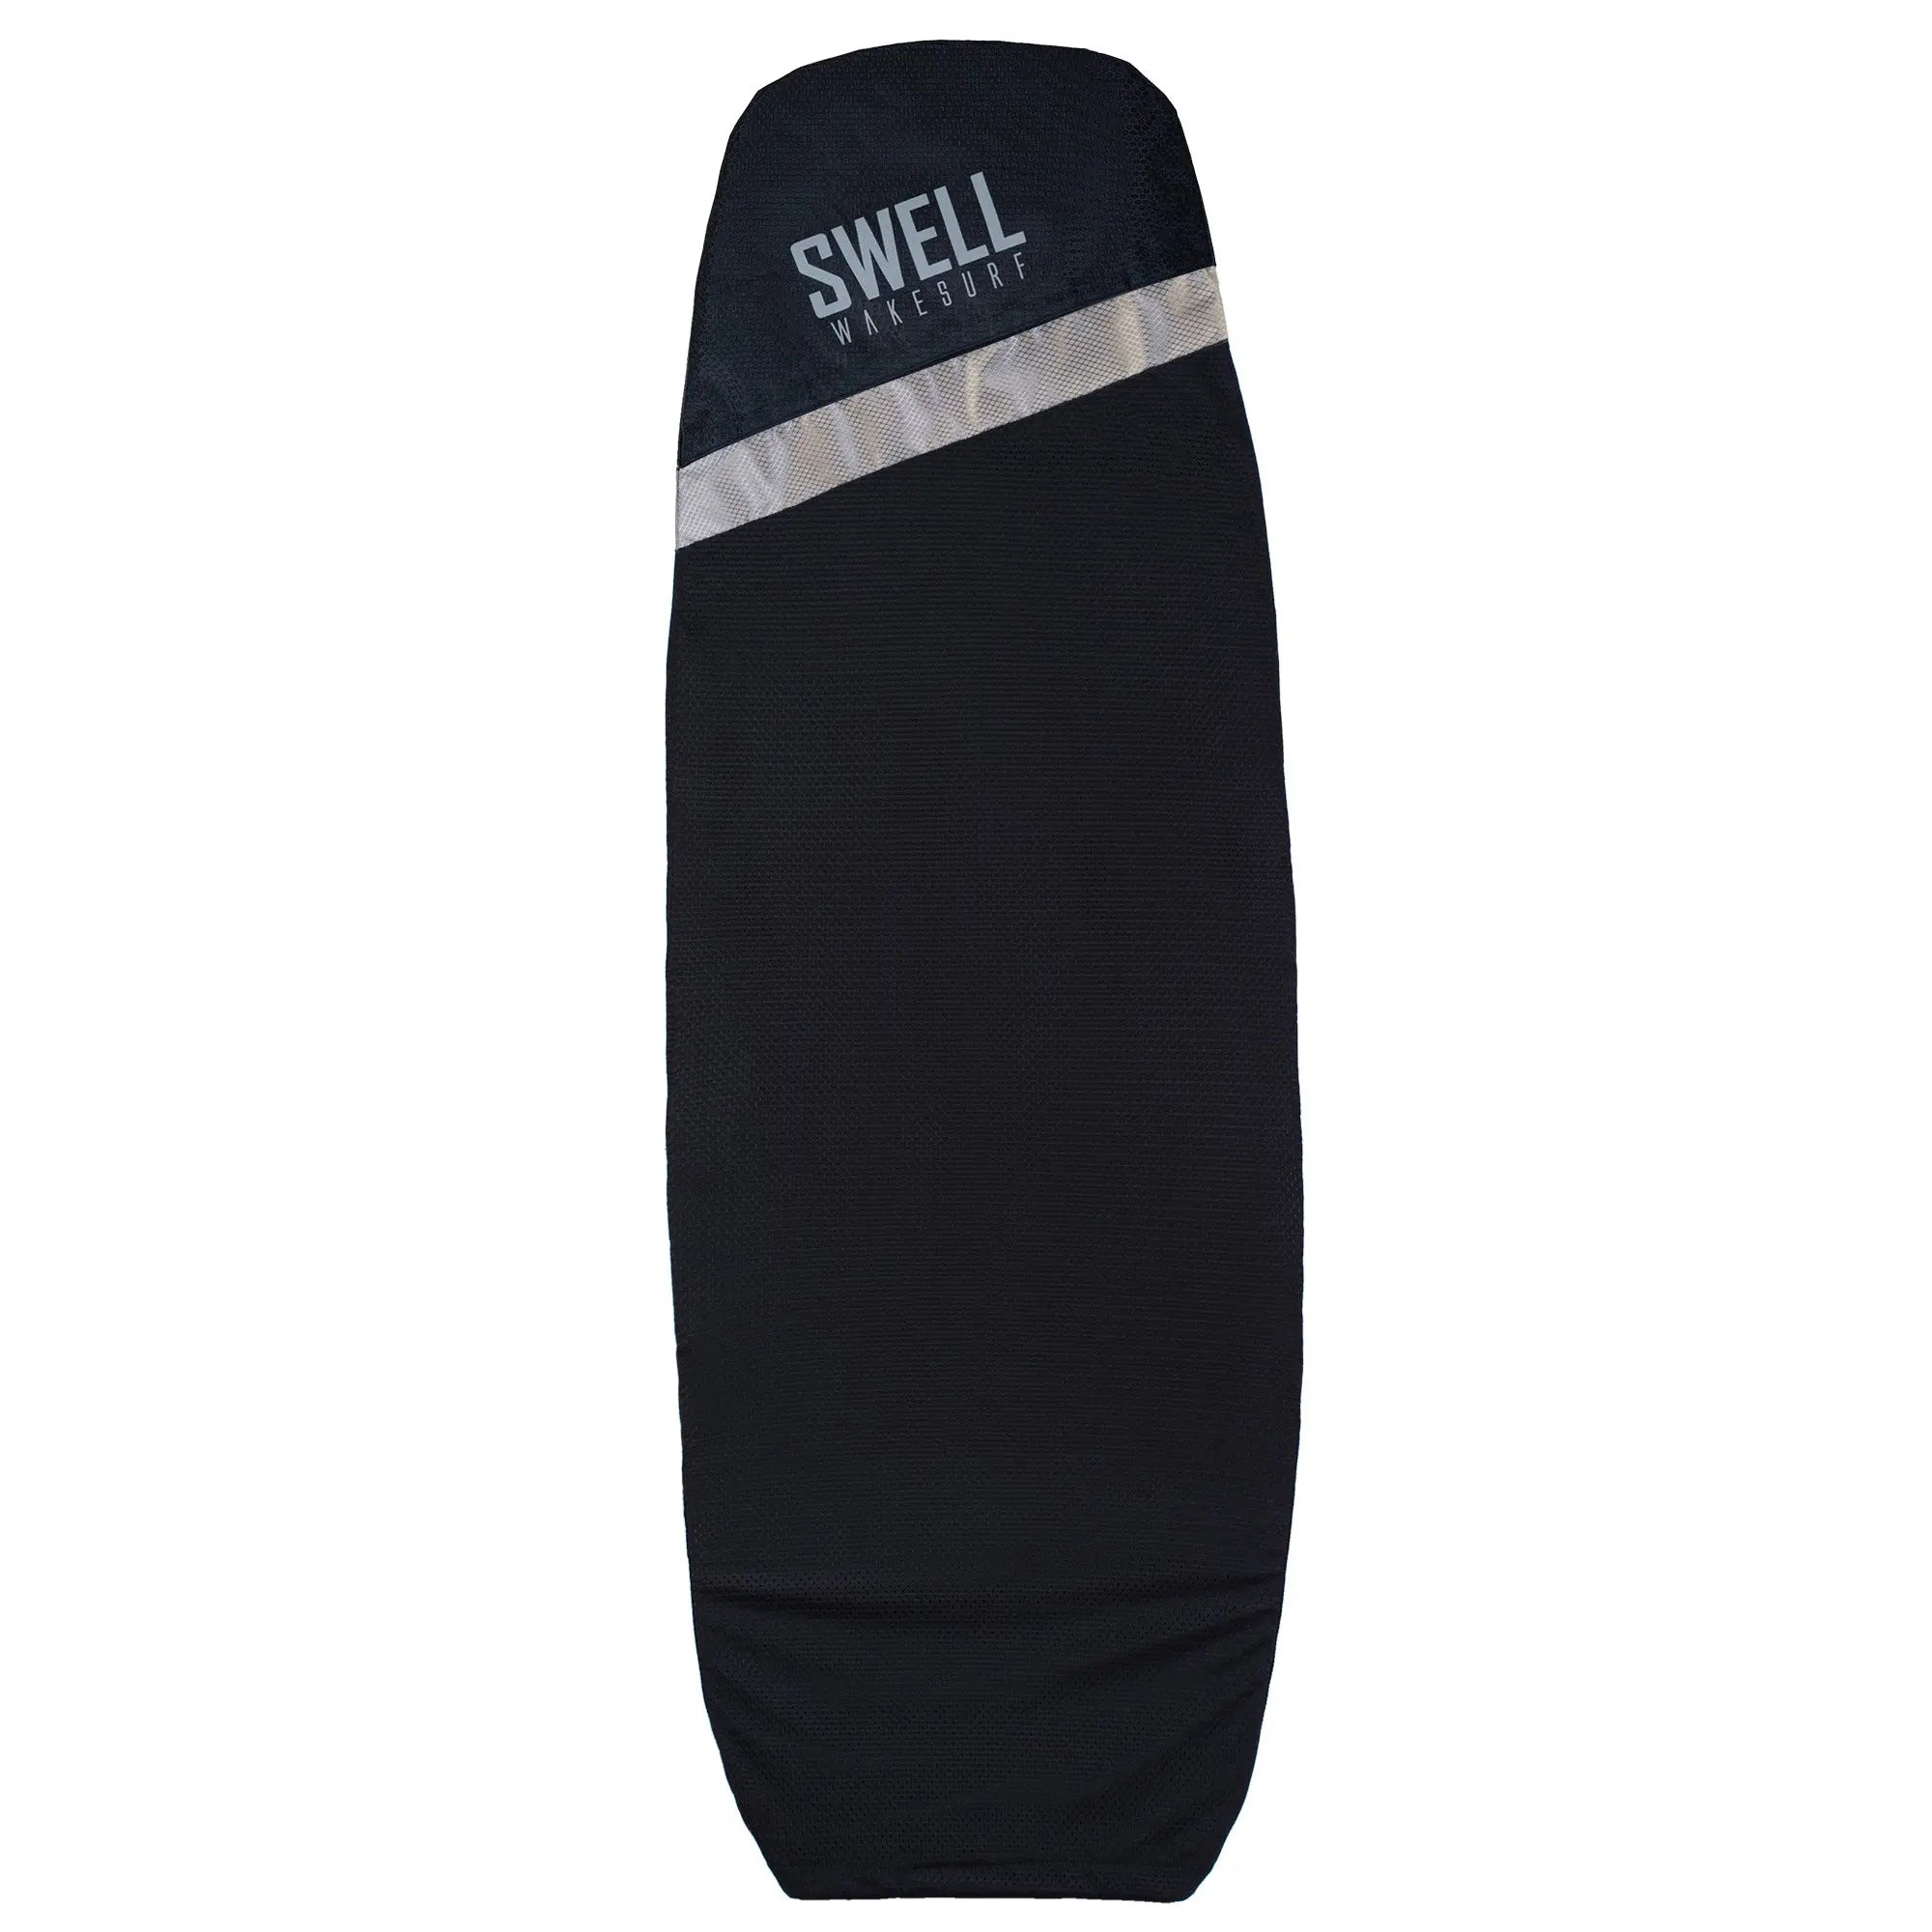 SWELL Wakesurf Board Surf Sock - Padded Nose With Nose Pocket SWELL Wakesurf